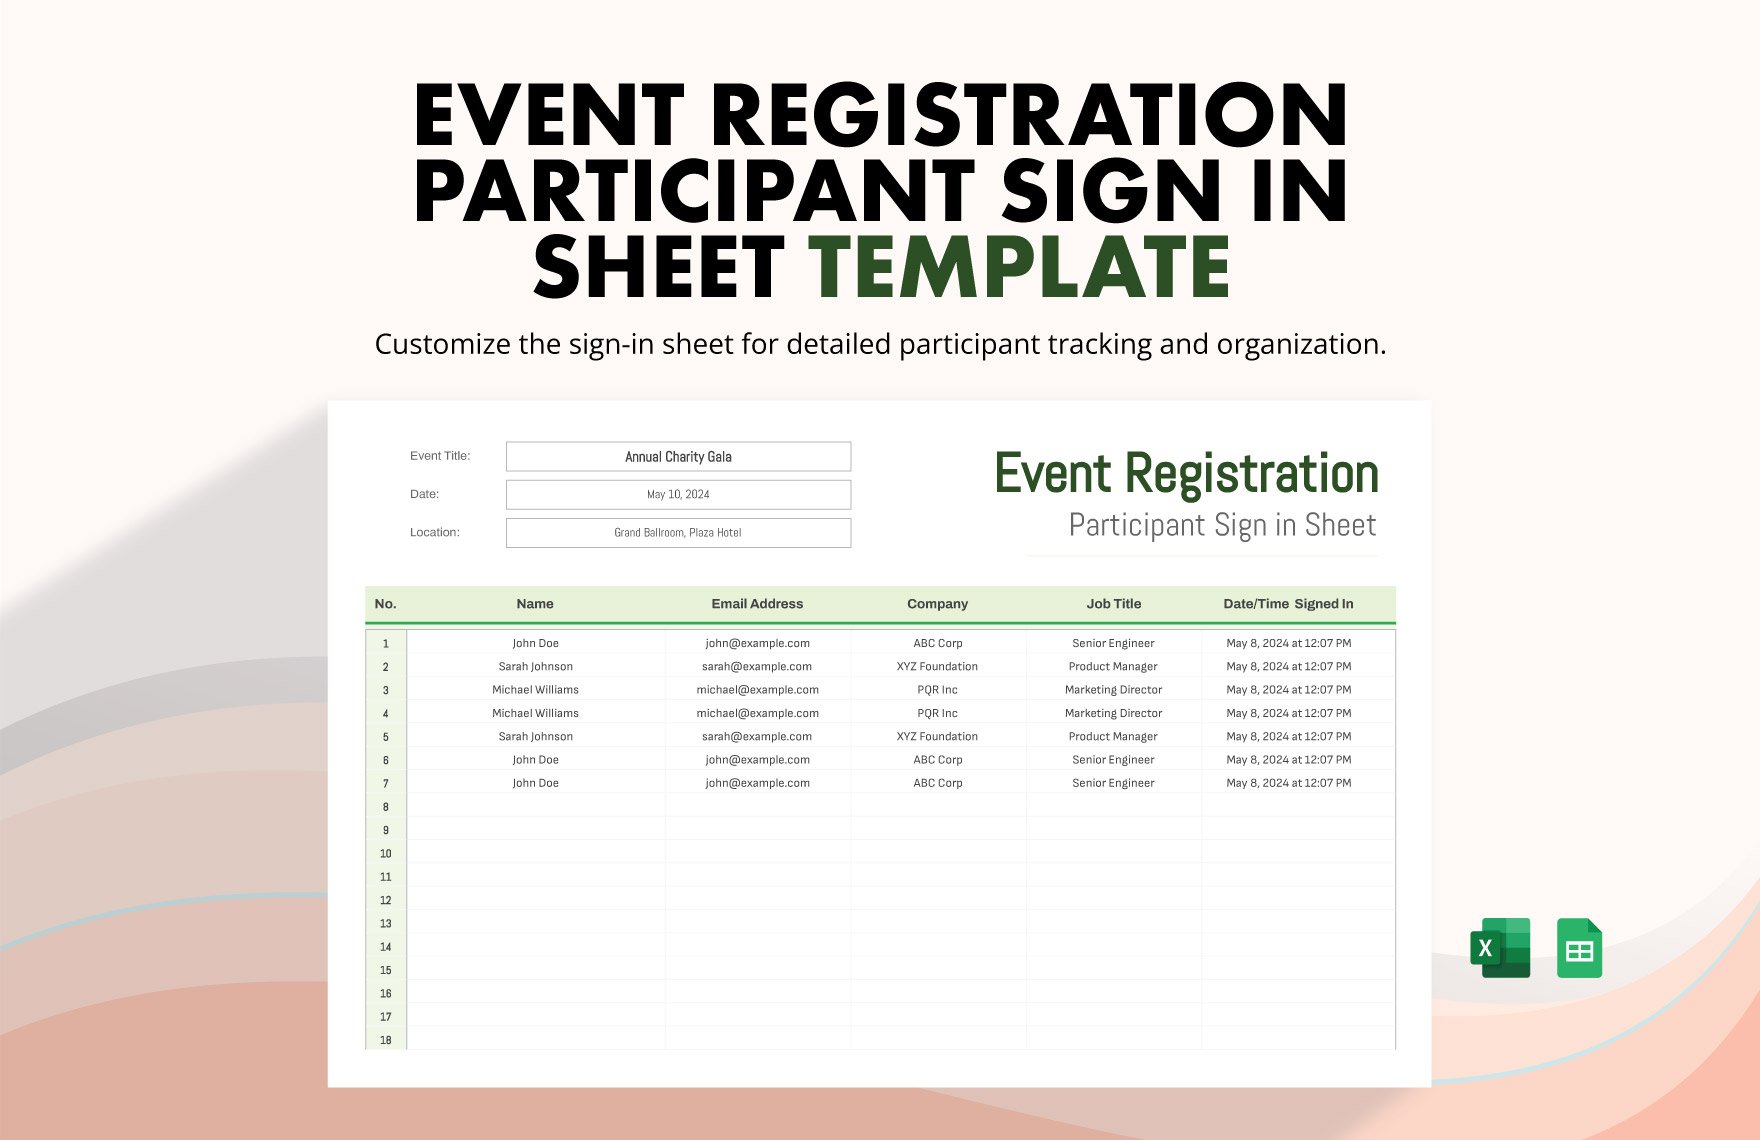 Free Event Registration Participant Sign in Sheet Template in Excel, Google Sheets